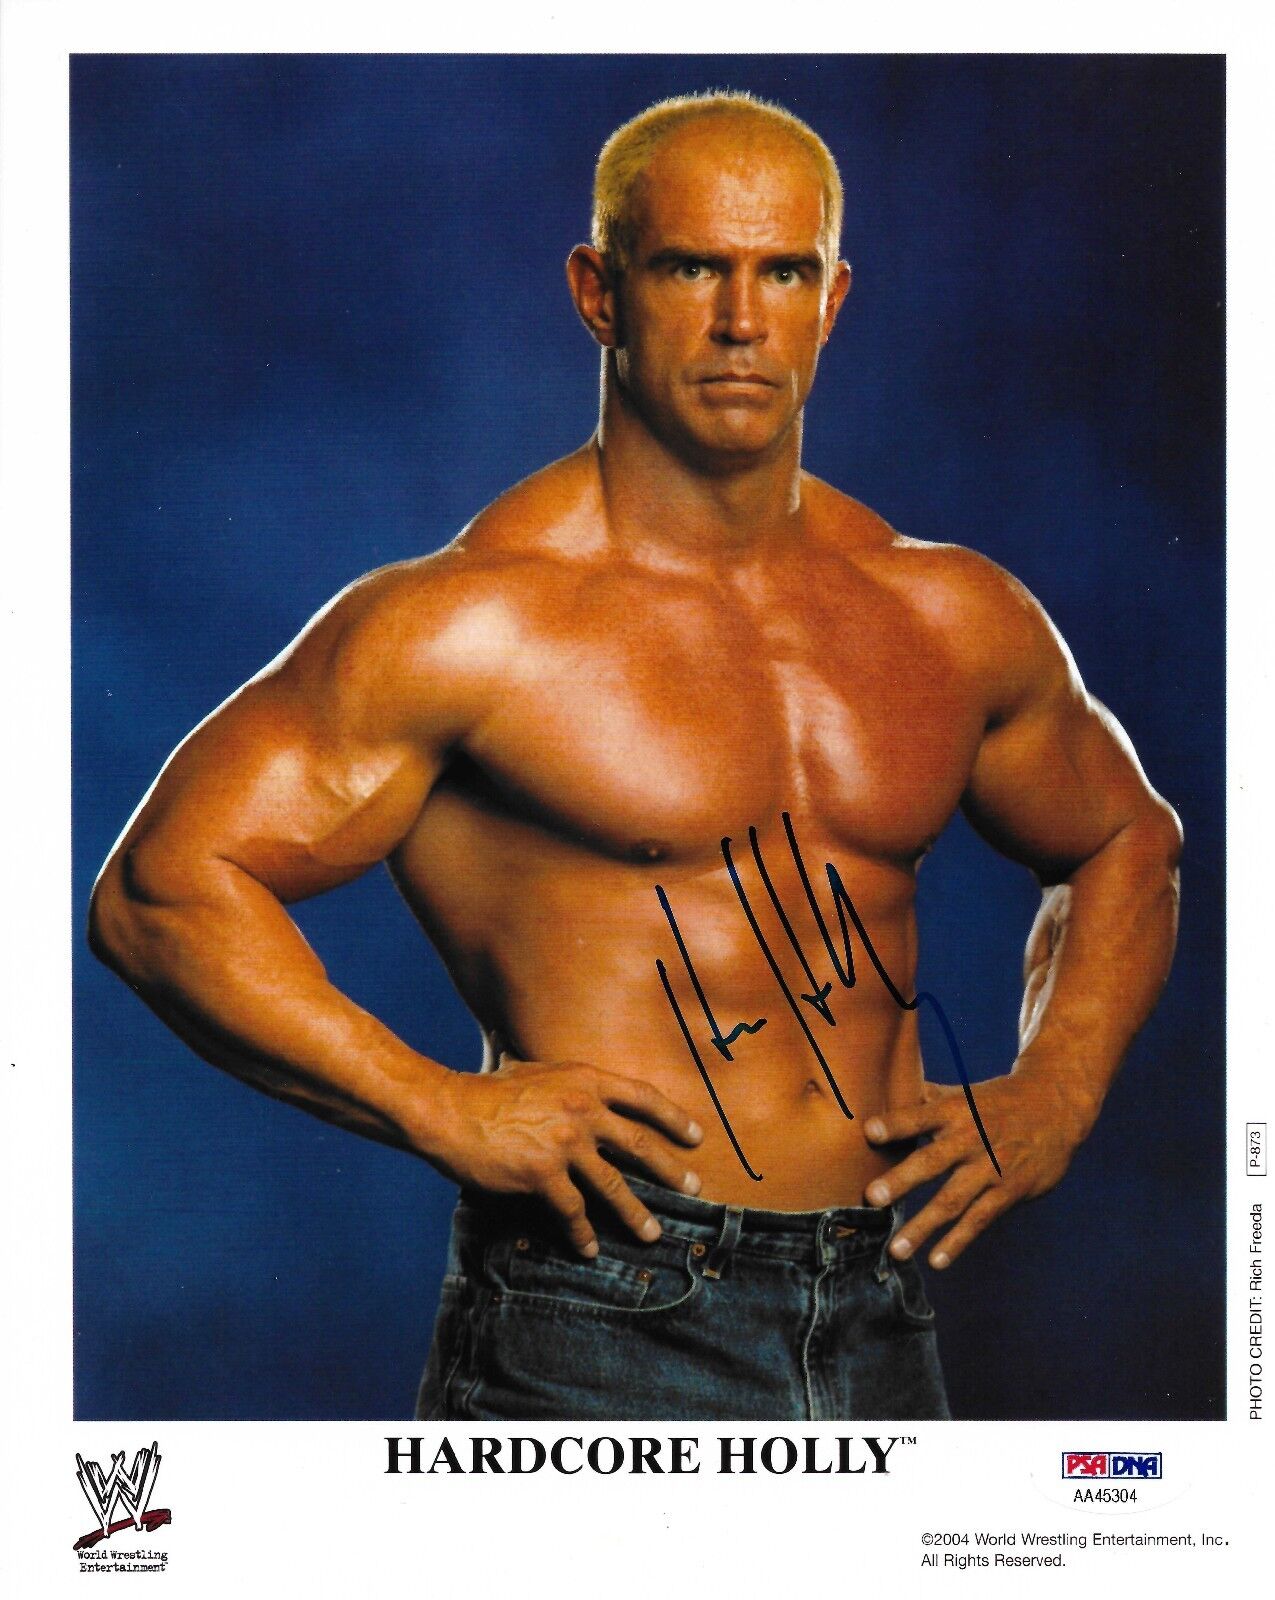 Hardcore Bob Holly Signed WWE 8x10 Photo Poster painting PSA/DNA COA JOB Squad Picture Autograph